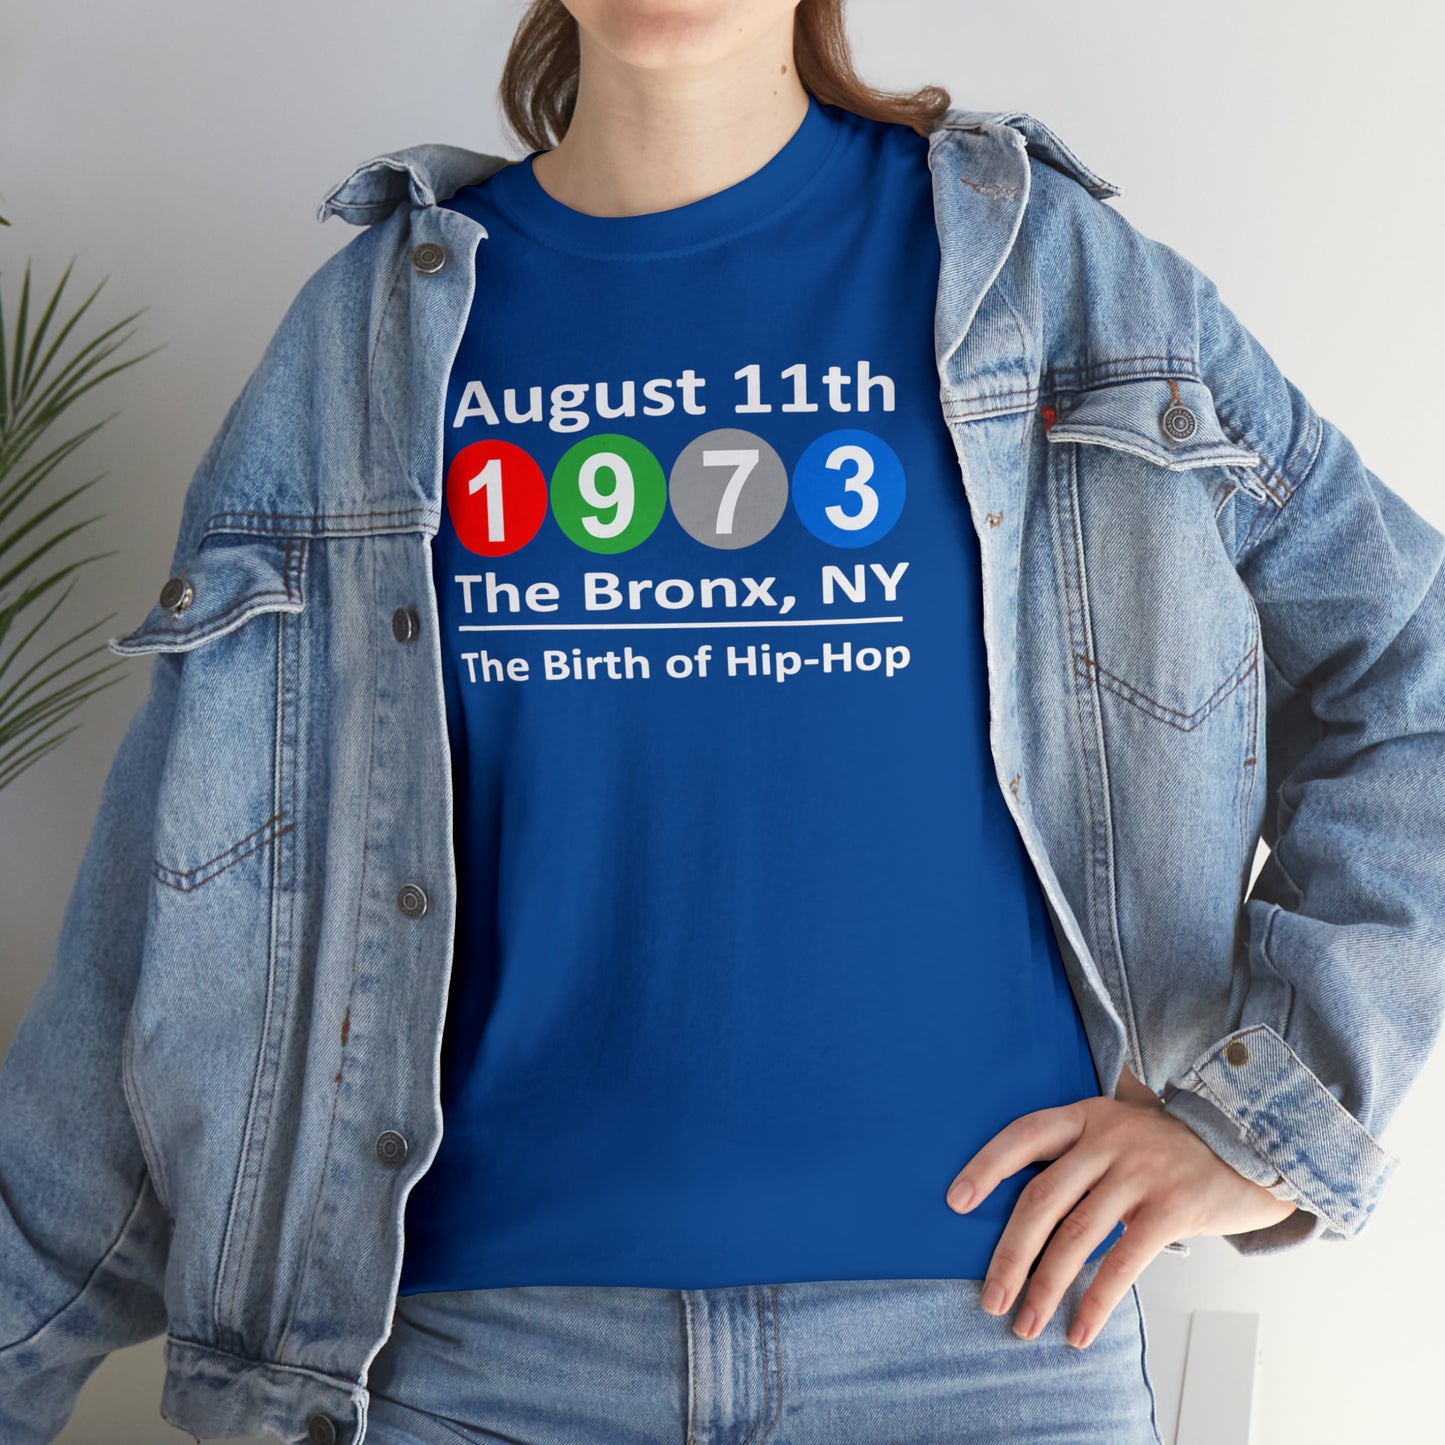 August 11th, 1973 The Bronx, NY The Birth of Hip-Hop T-Shirt